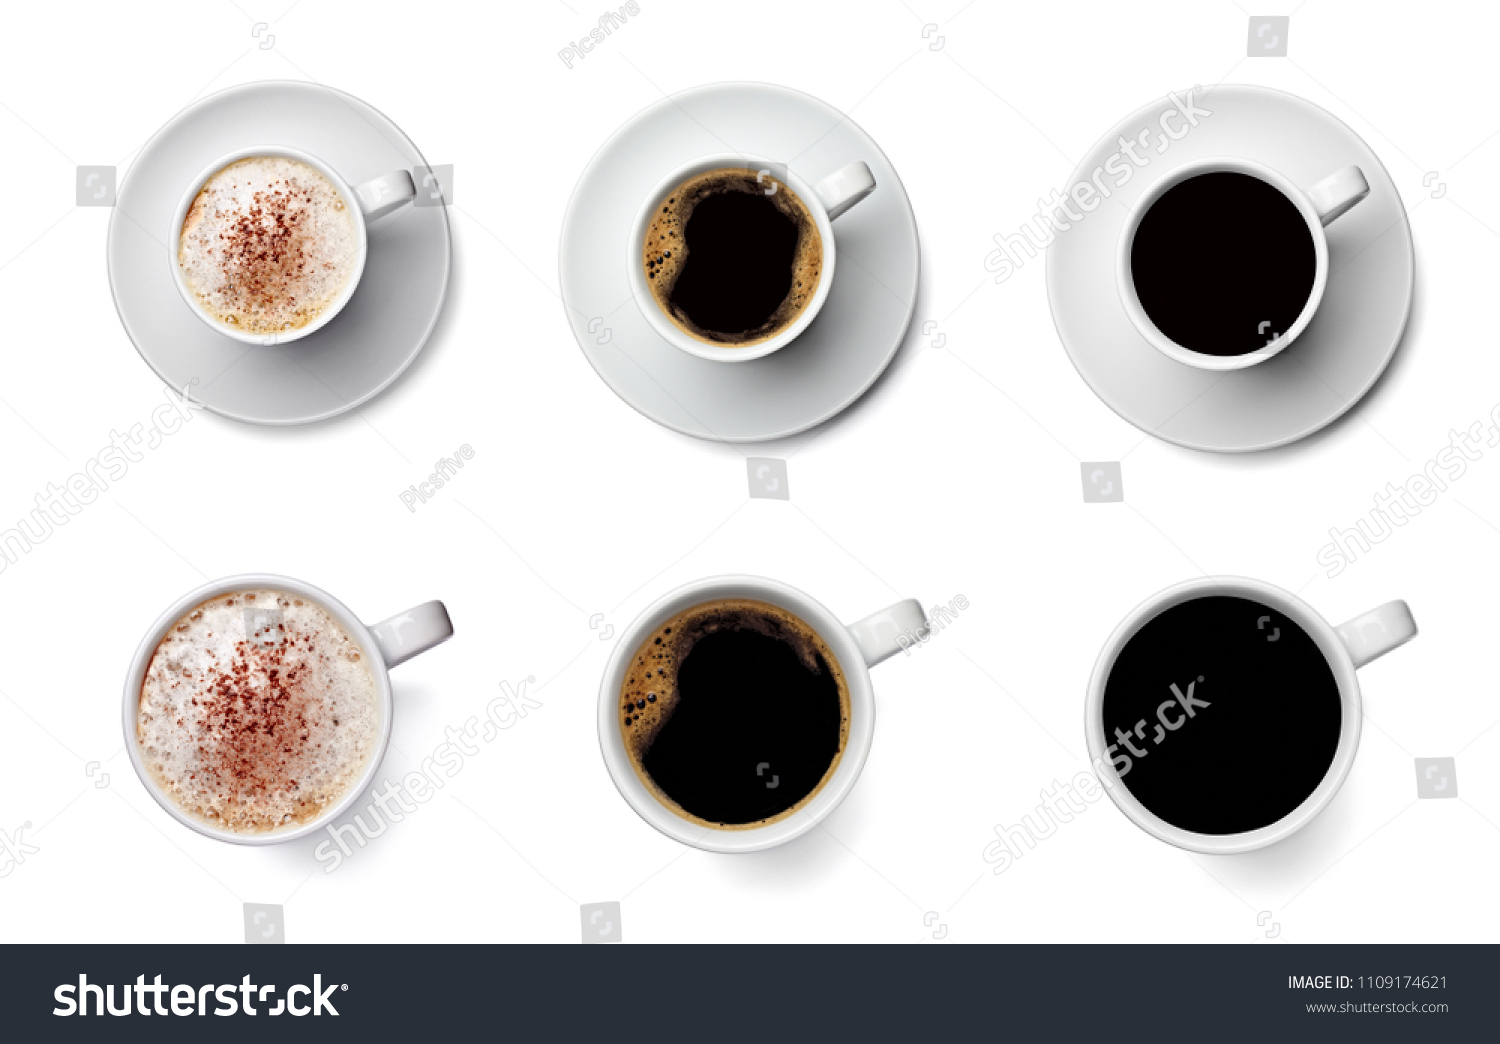 collection of various coffee cup on white background. each one is shot separately #1109174621